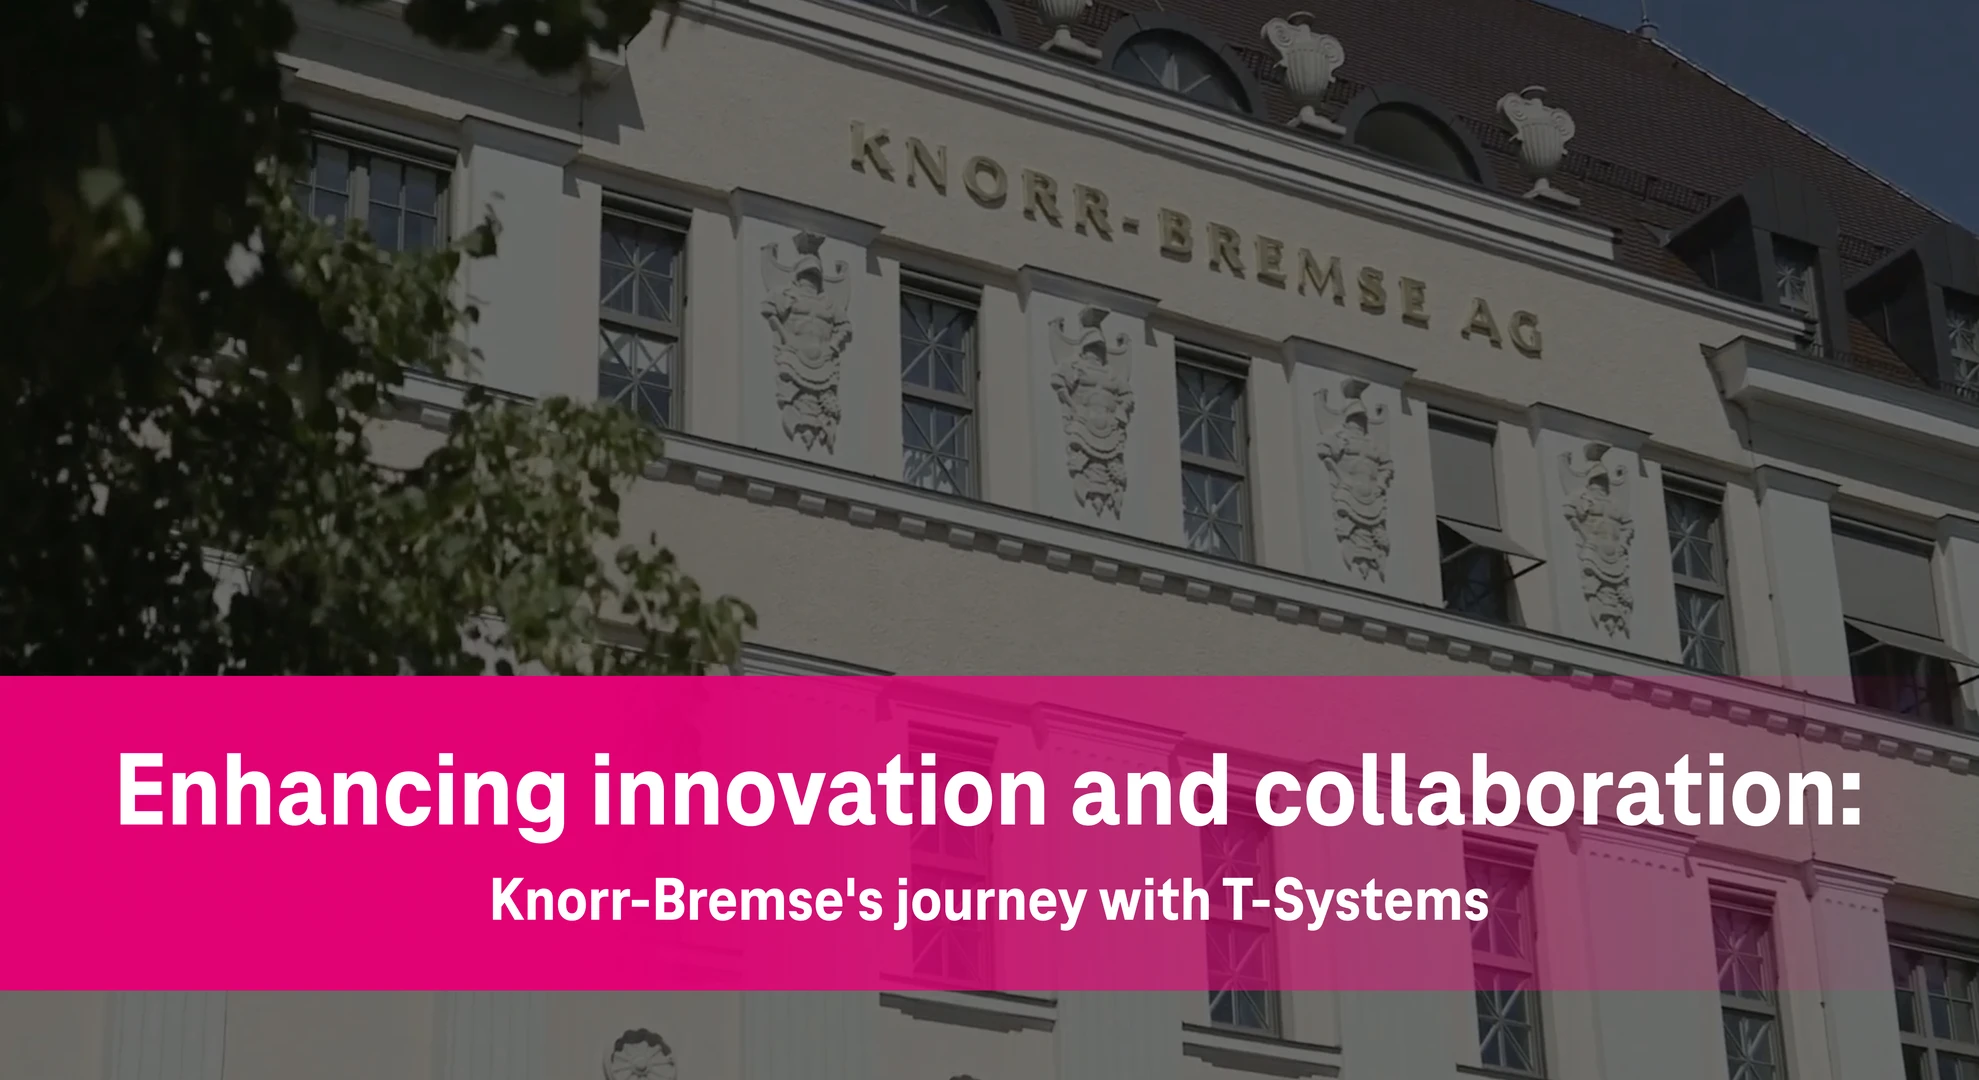 Enhancing innovation and collaboration: Knorr-Bremse's journey with T-Systems